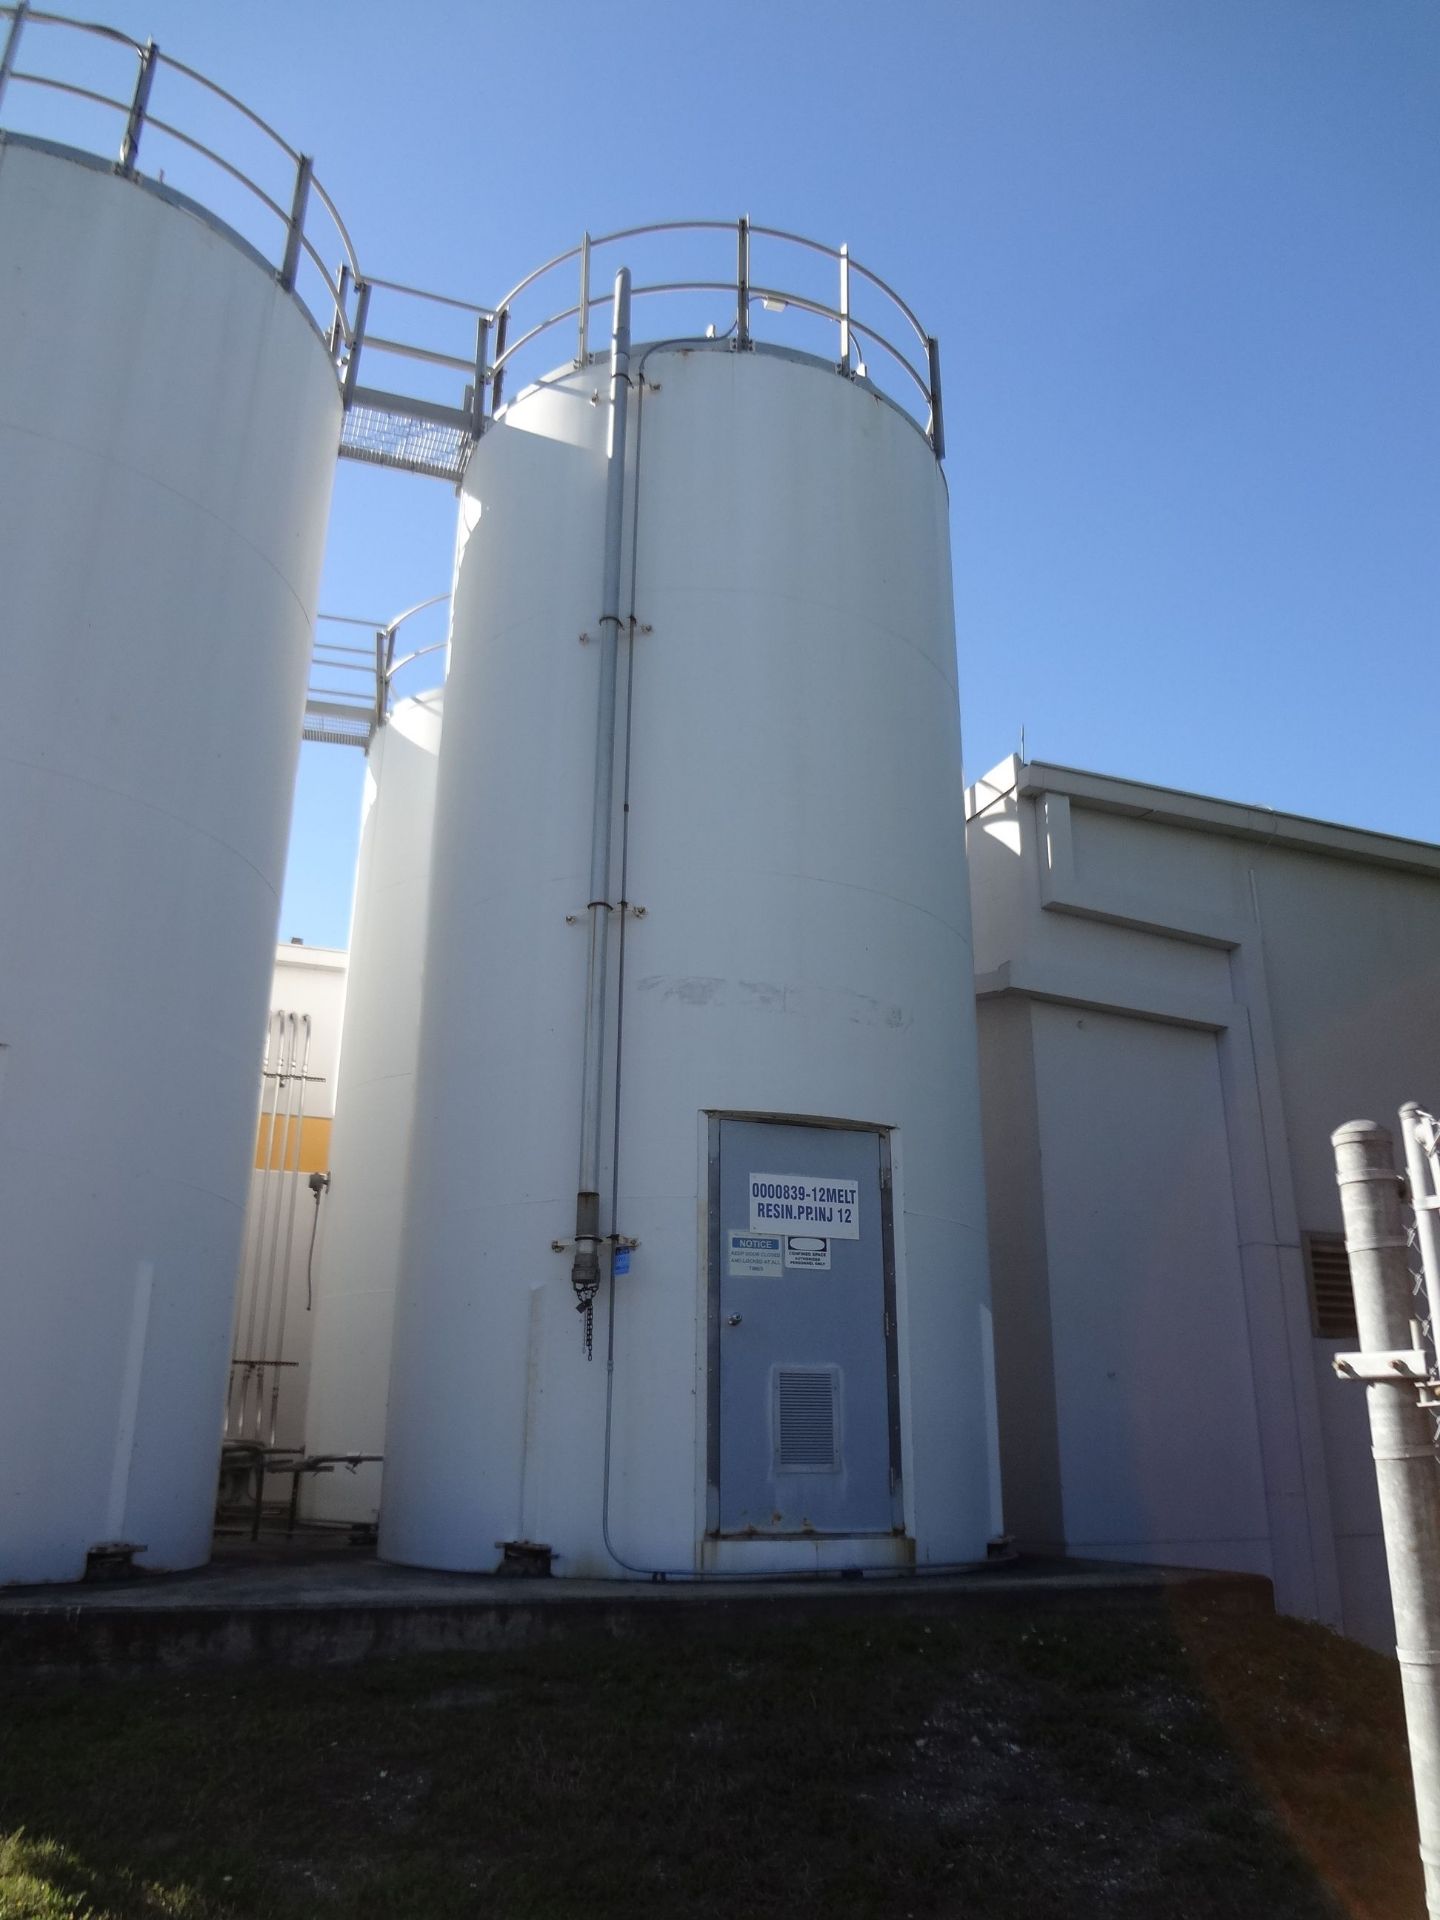 12' DIAMETER X 24' HIGH A.O. SMITH WELDED STEEL PLASTIC MATERIAL STORAGE SILO, 1,703 NOMINAL CUBIC